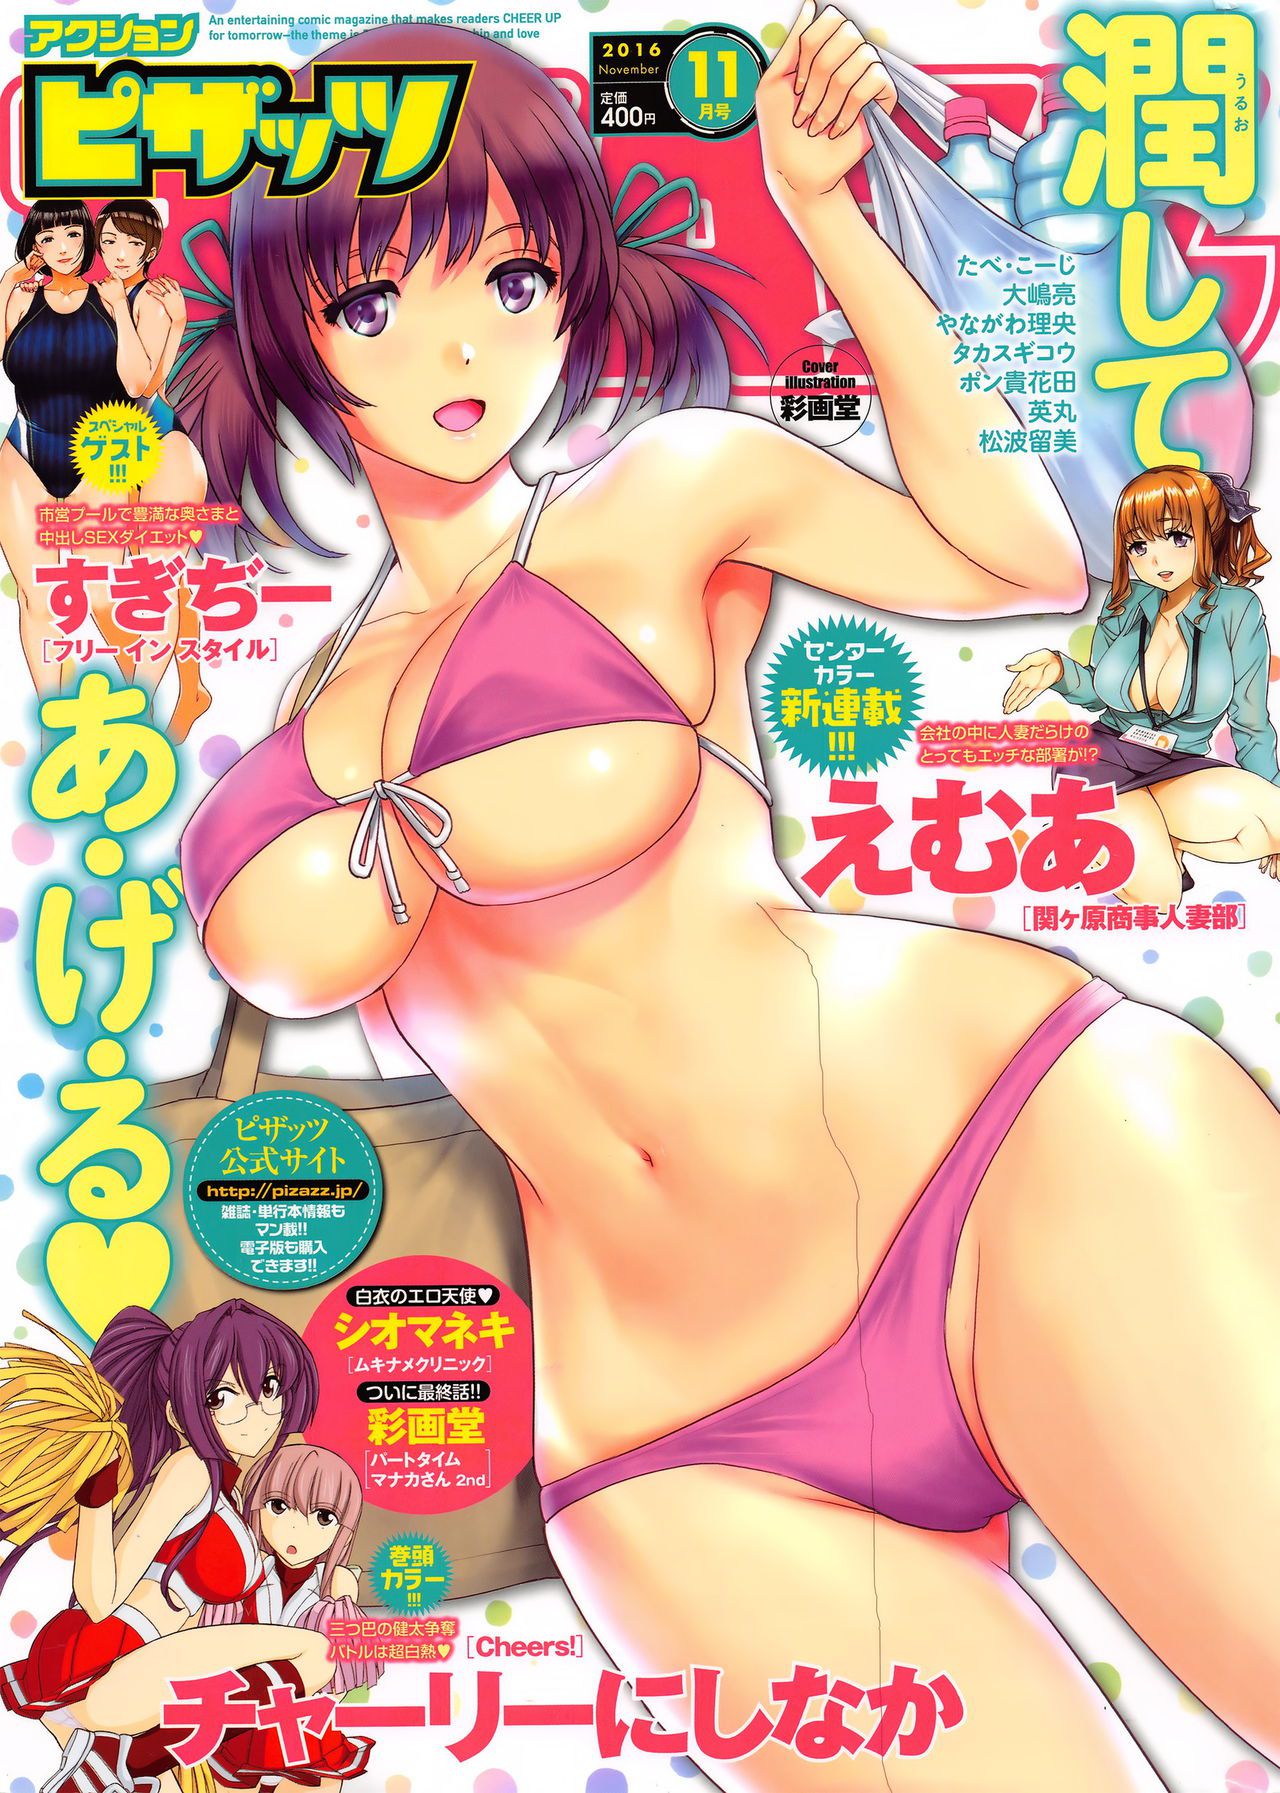 [Saigado] Cover Illustrations [彩画堂] Cover Illustrations 95